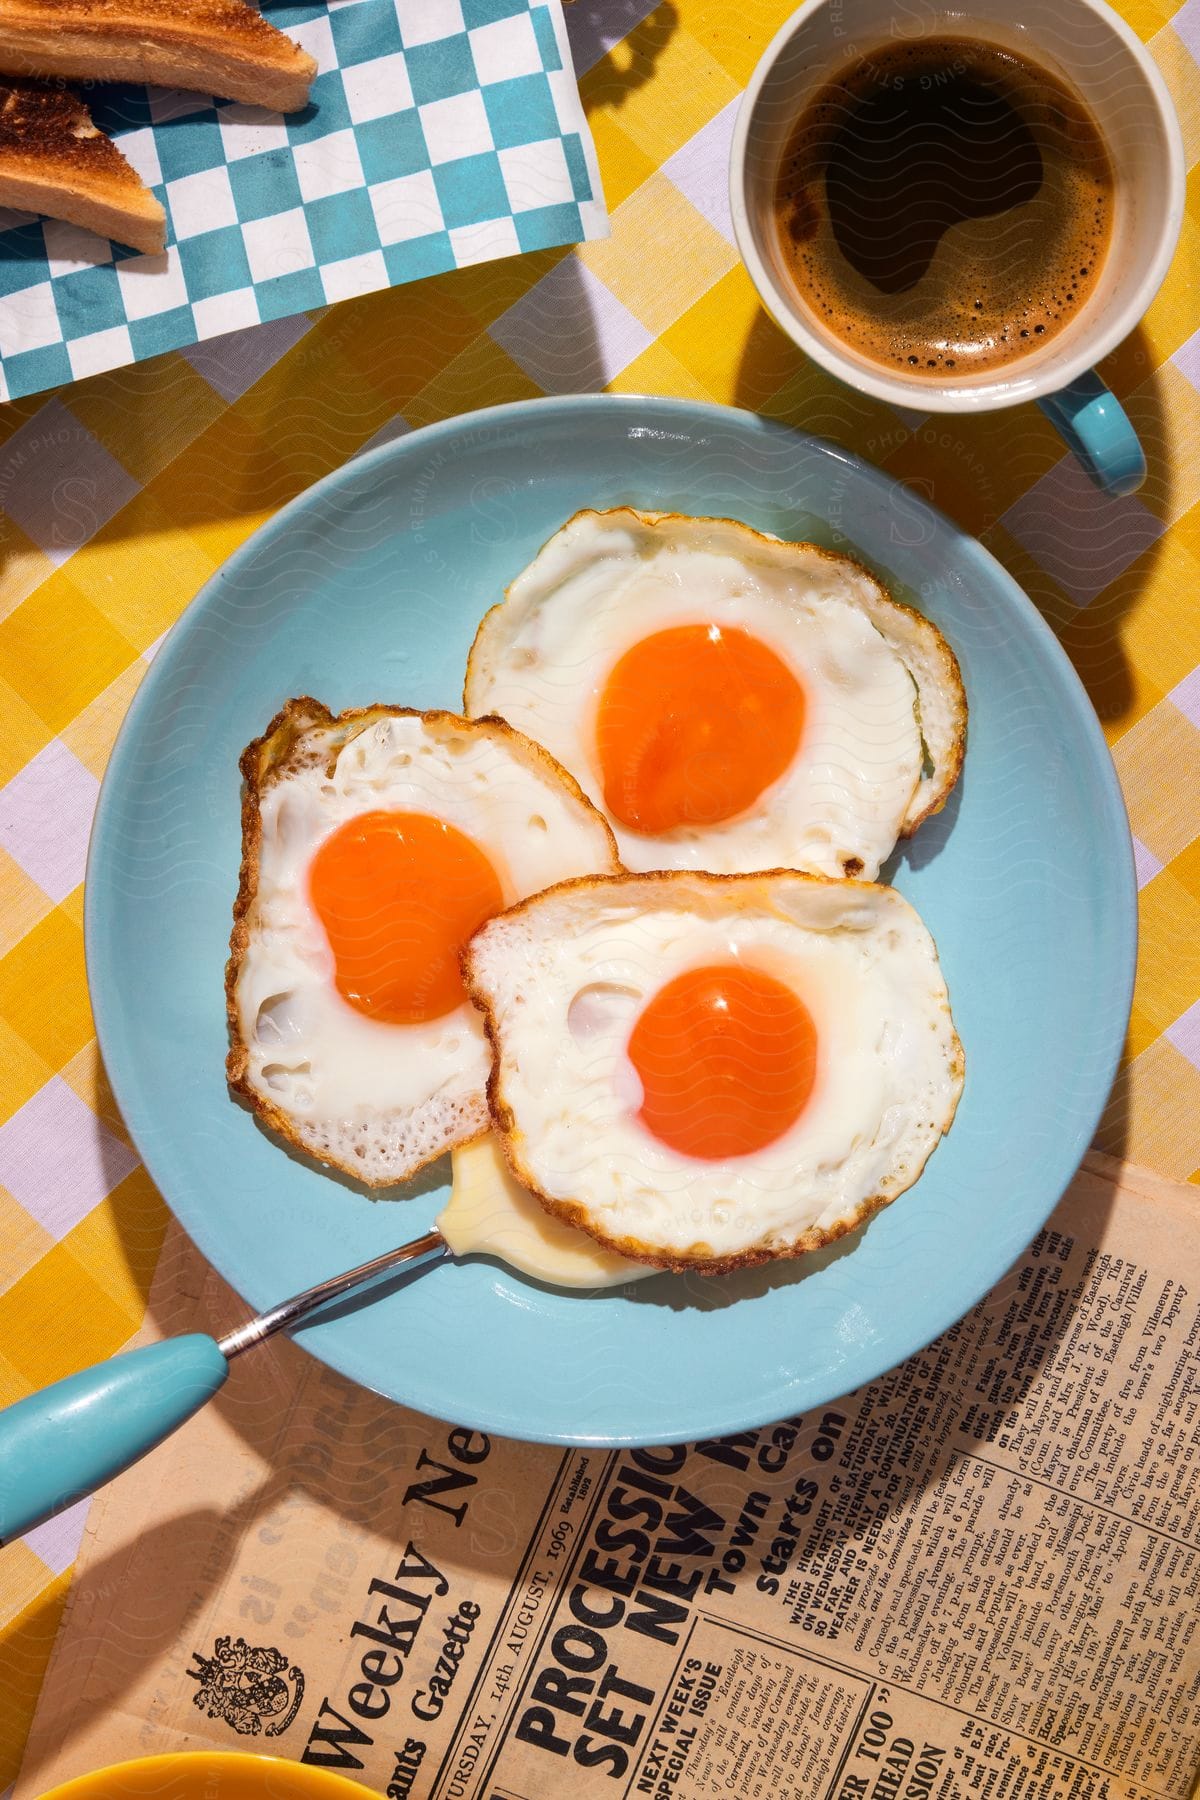 Three sunny-side up eggs on a blue plate with a blue and white checkered napkin with toast and a cup of black coffee.